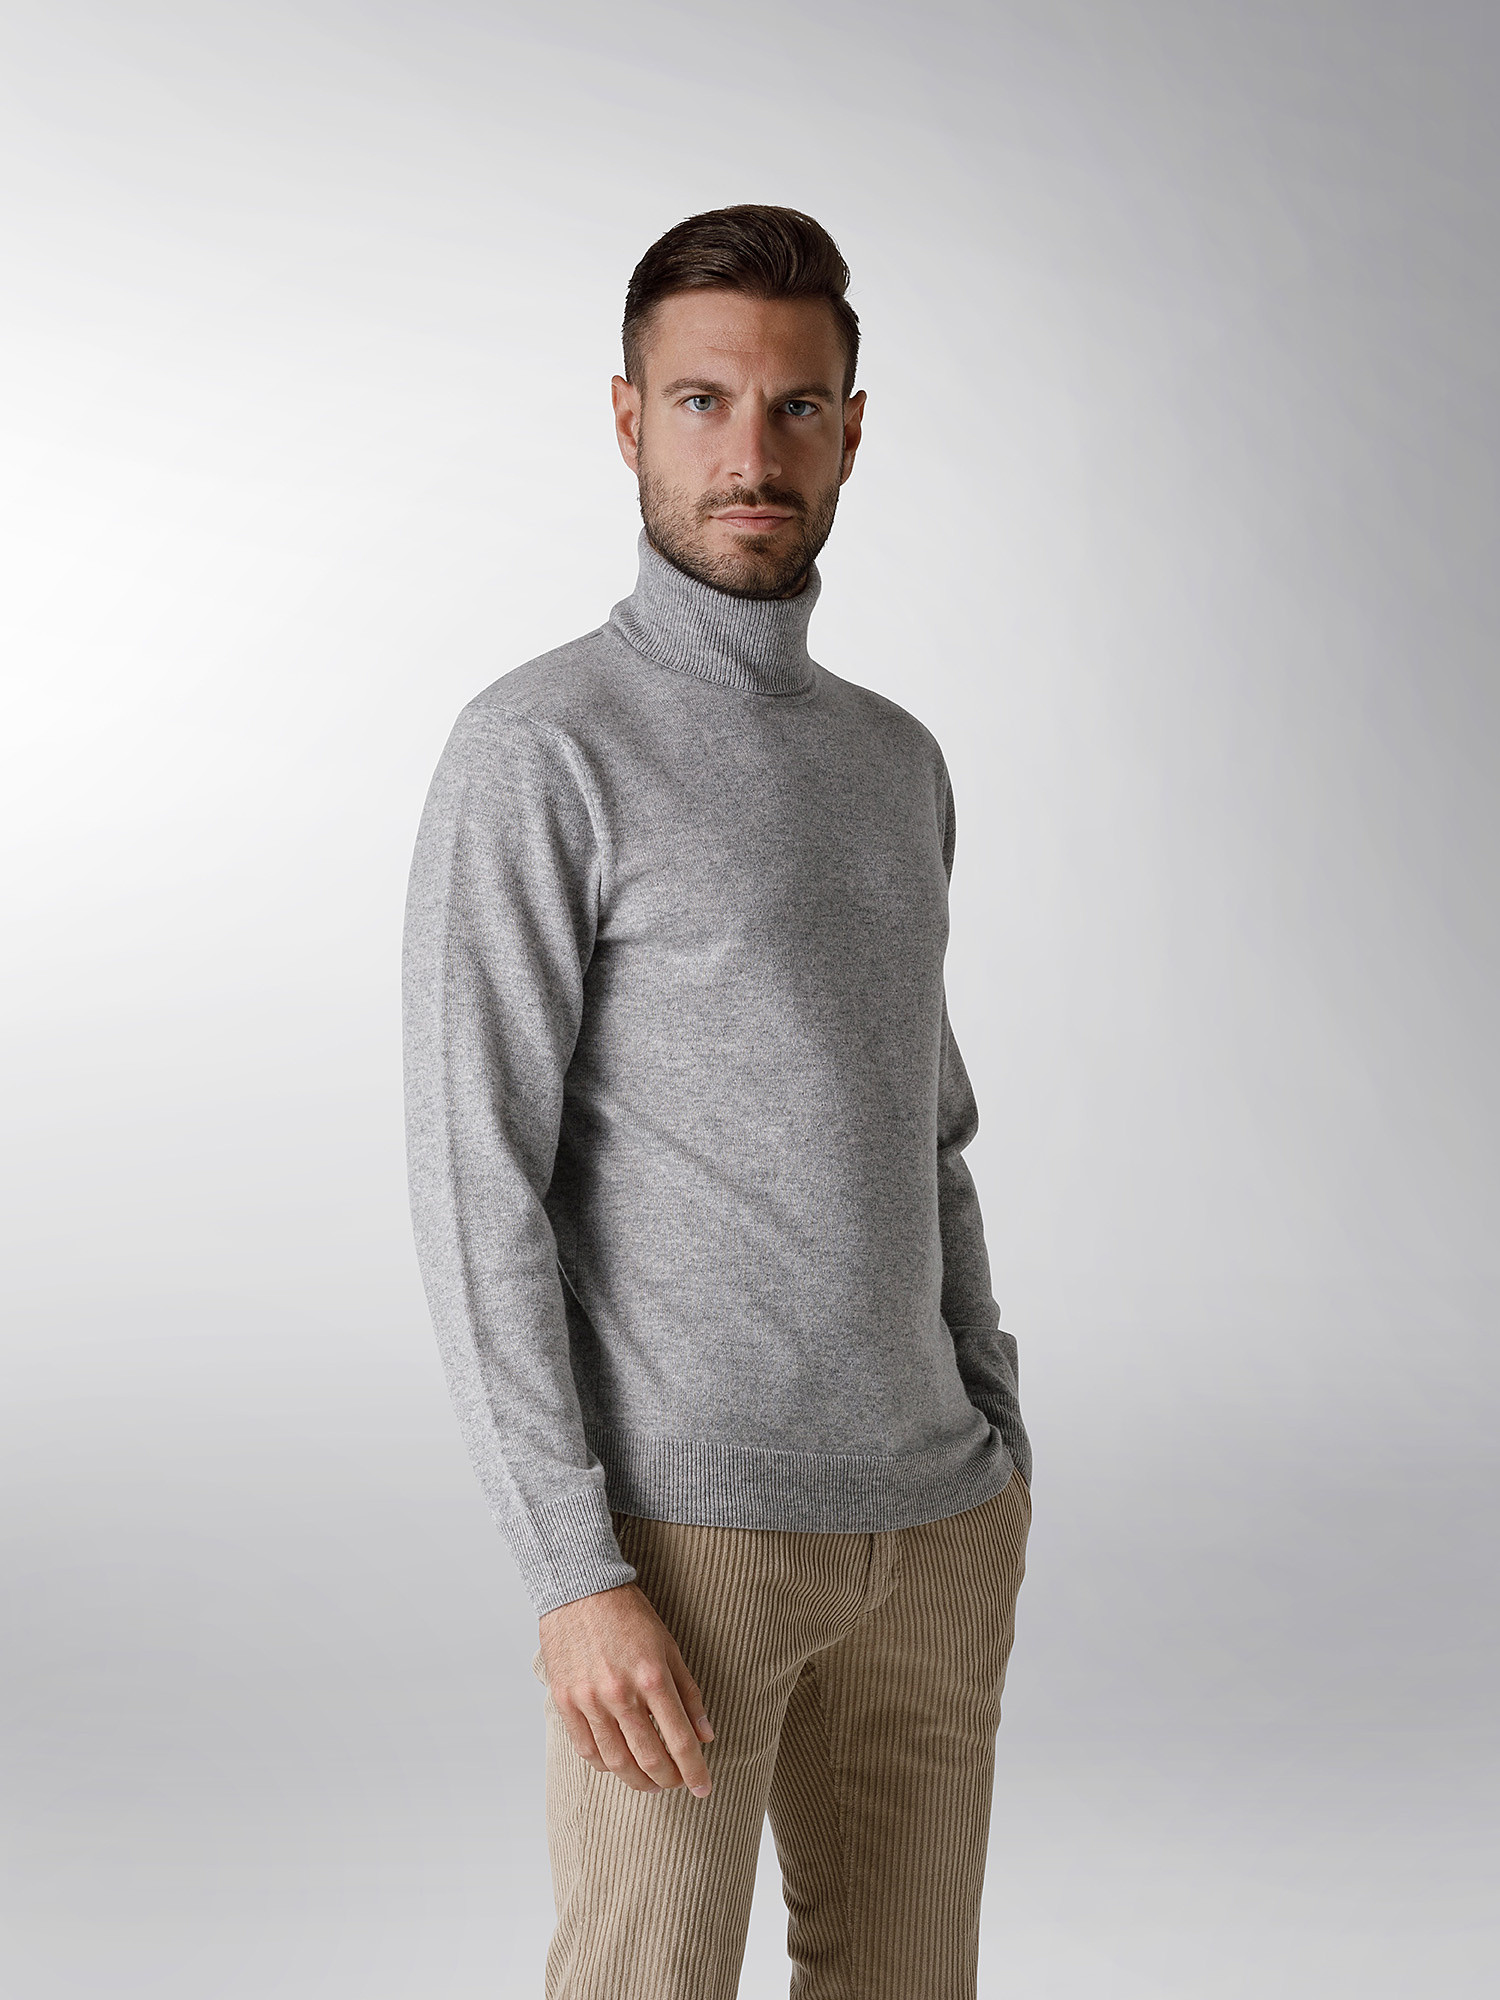 Coin Cashmere - Turtleneck in pure premium cashmere, Light Grey, large image number 1